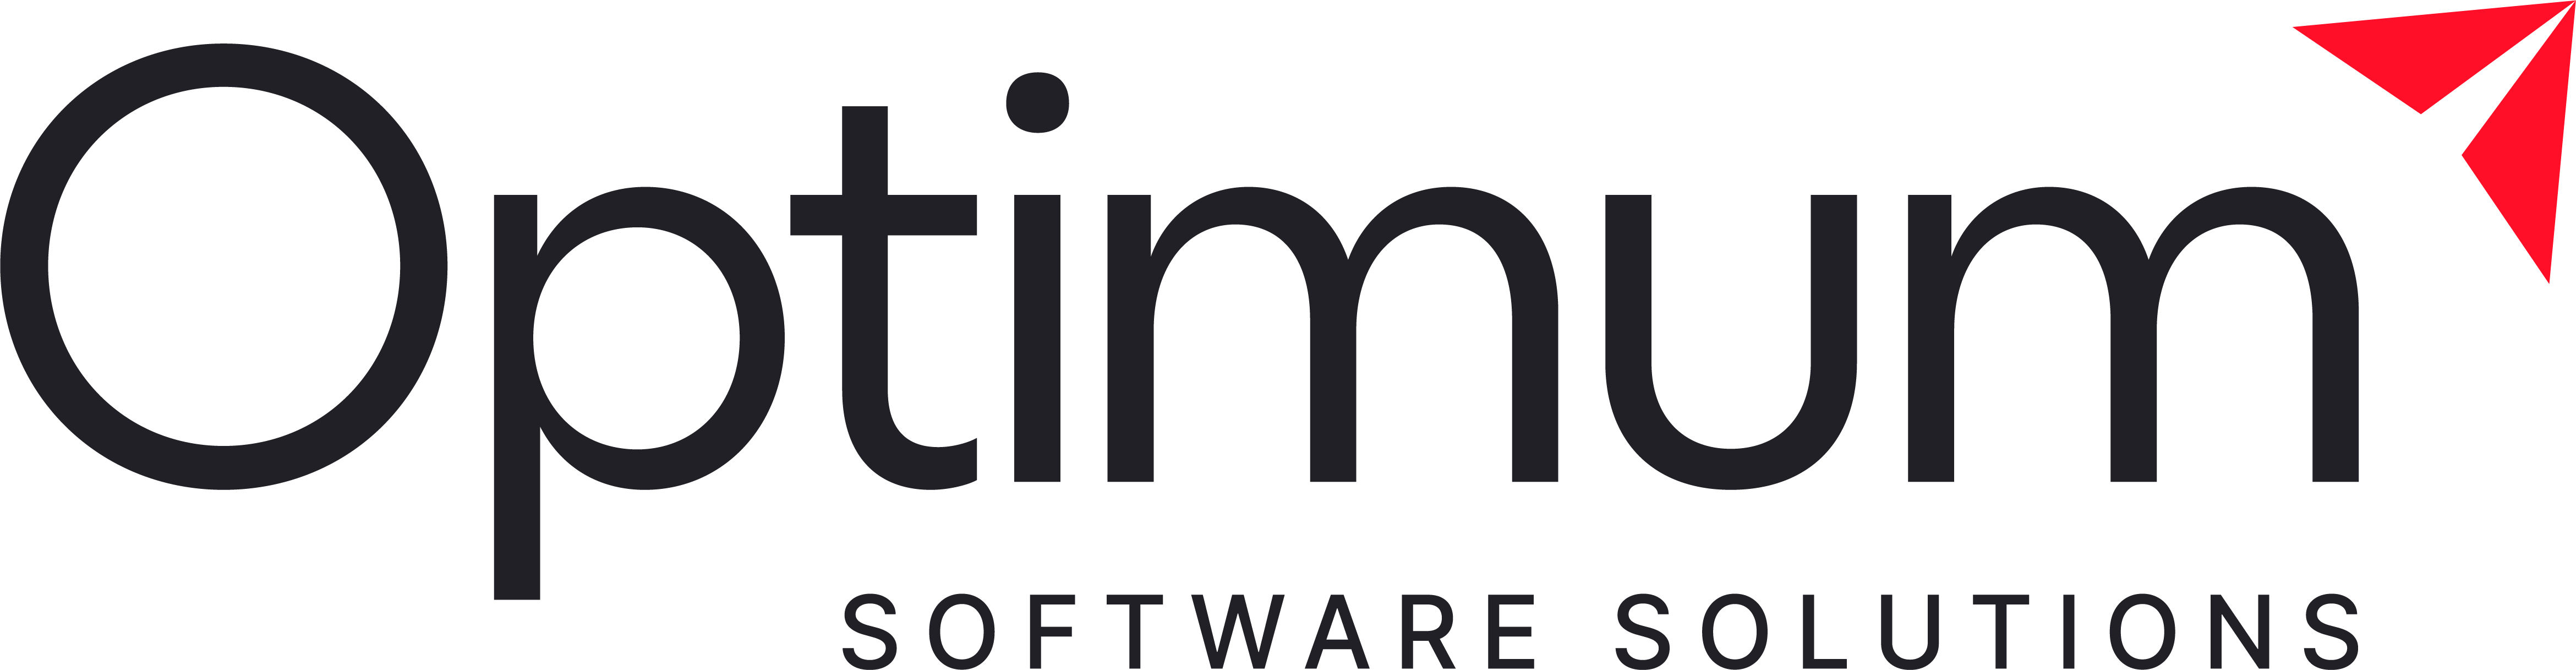 Optimum – Modern Software Solutions and Services